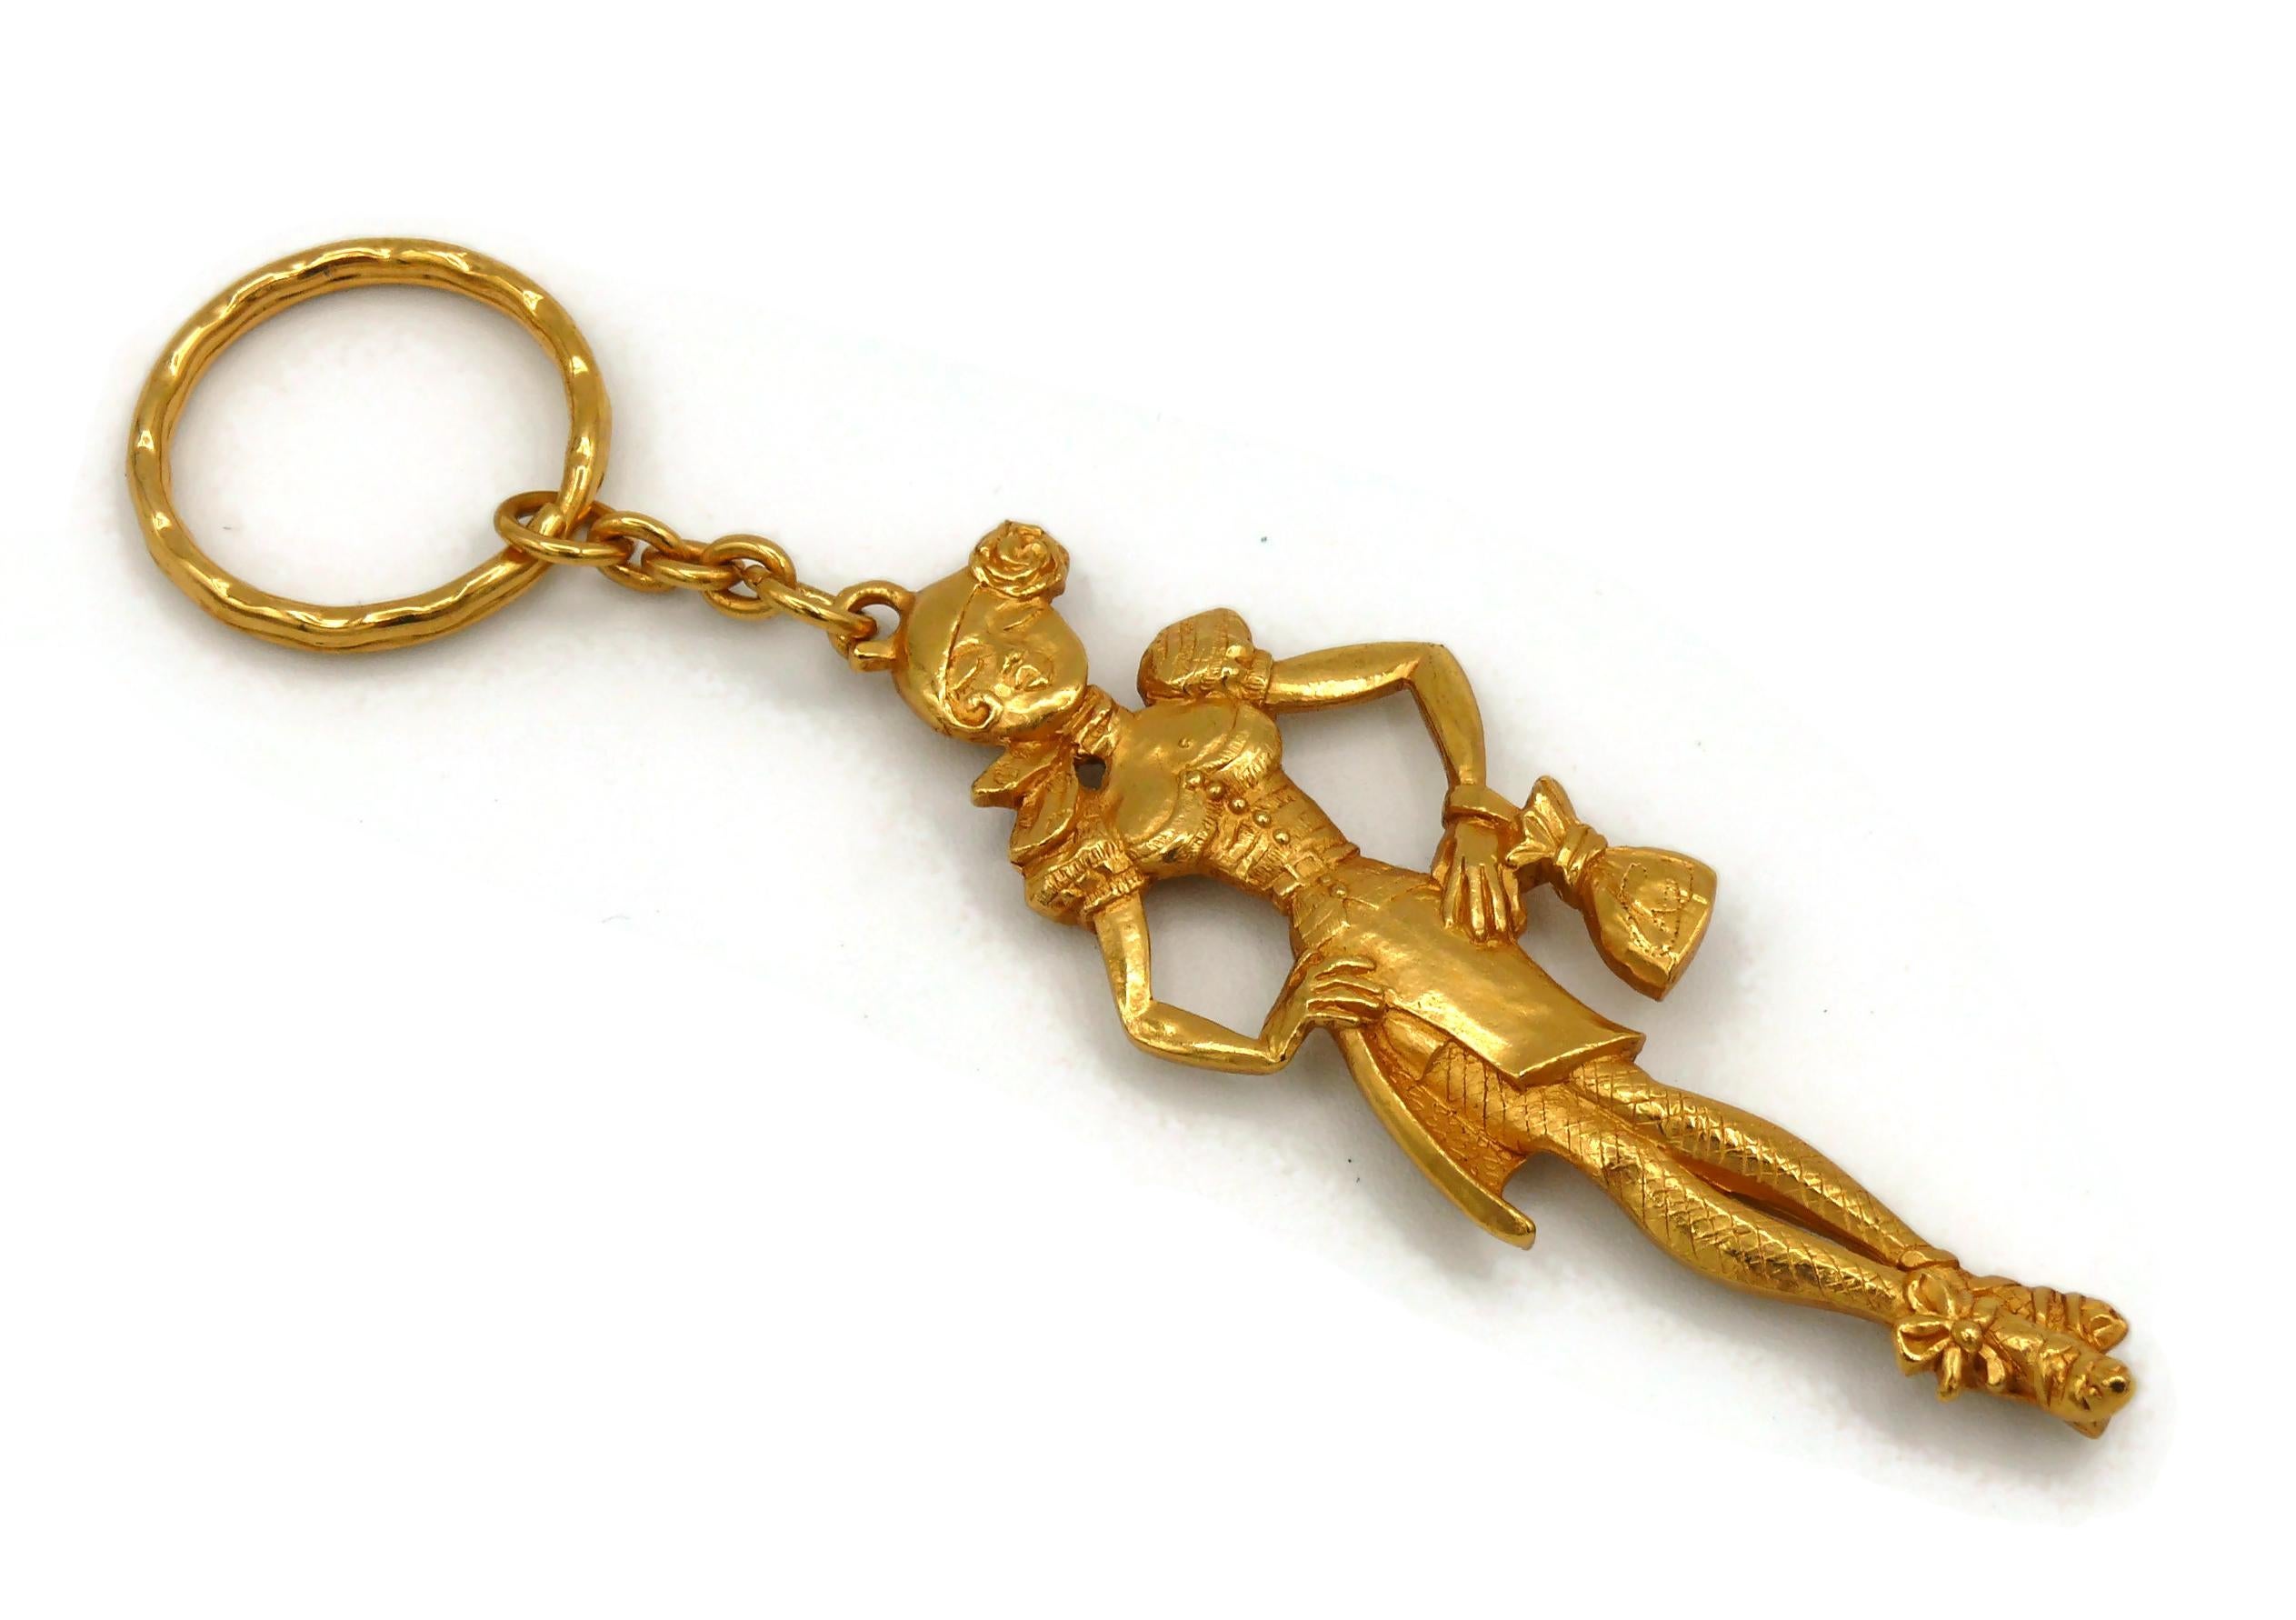 CHRISTIAN LACROIX vintage figural ARLETY gold toned key ring / bag charm.

Embossed CL Made in France.

Indicative measurements : total length approx. 13.5 cm (5.31 inches) / lady approx. max. 8.5 cm x max. 3 cm (3.35 inches x 1.18 inches).

NOTES
-